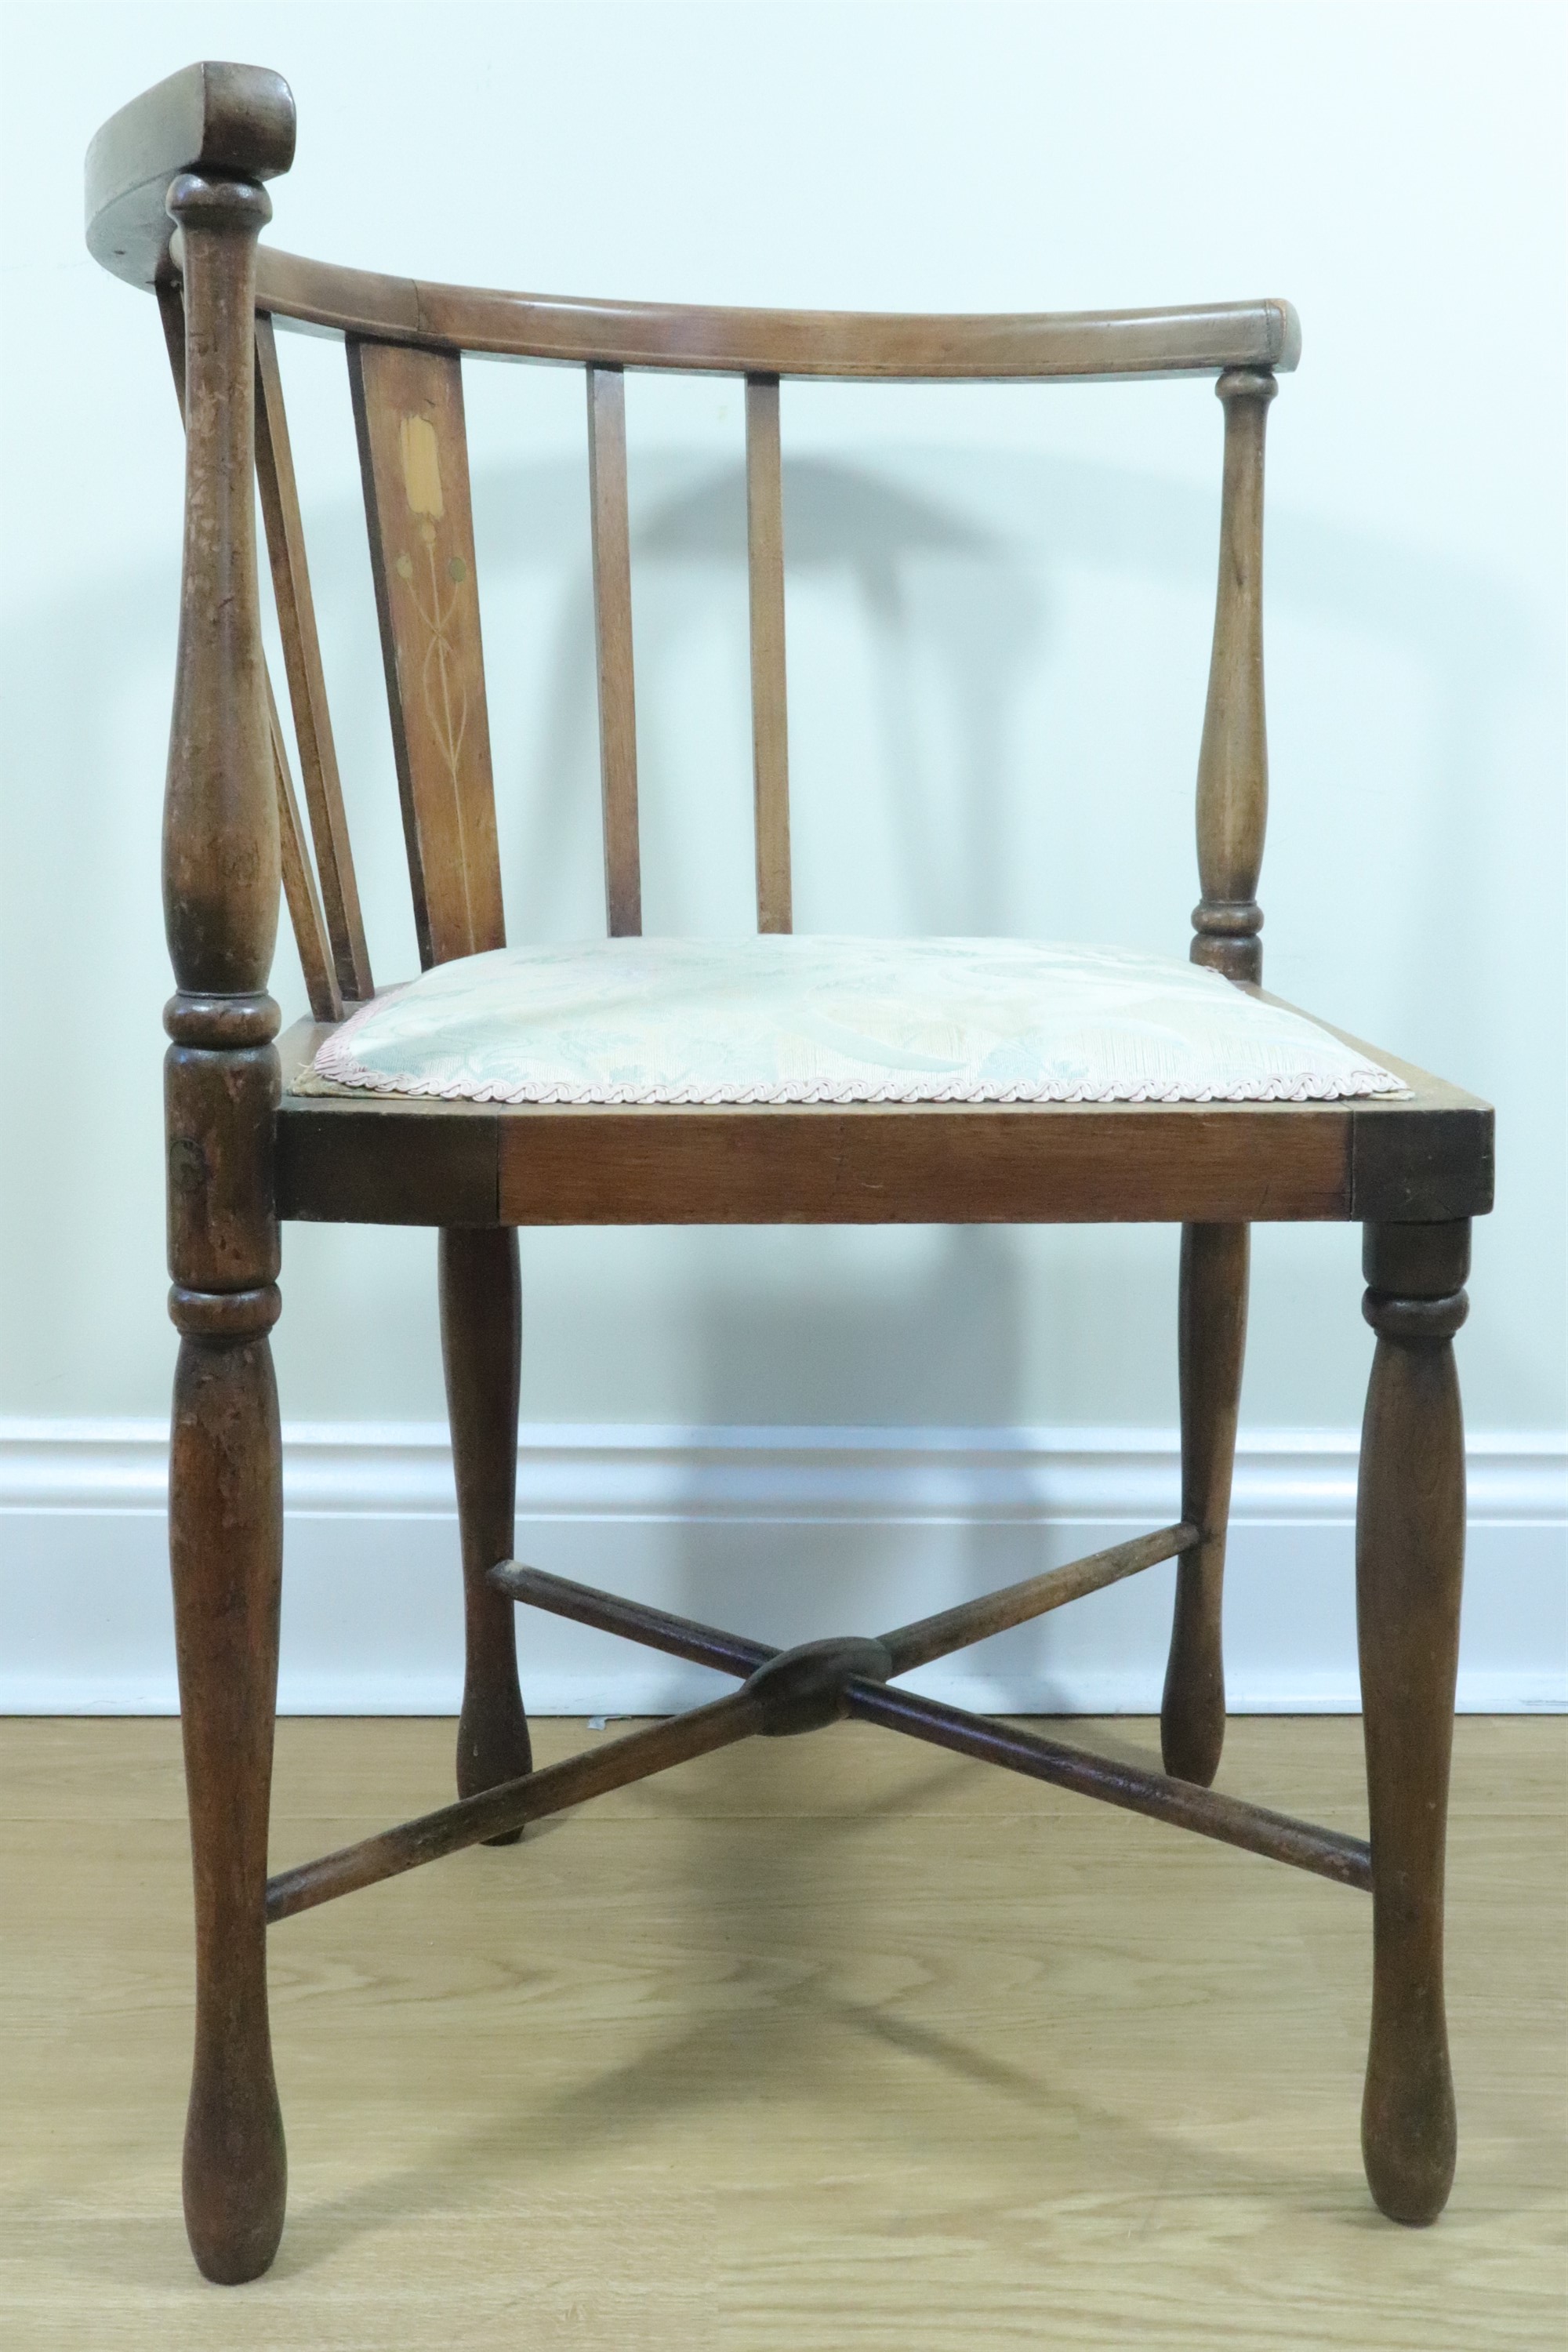 An early 20th Century inlaid mahogany corner chair, the back splat having a stylized tulip inlay, 69 - Image 2 of 2